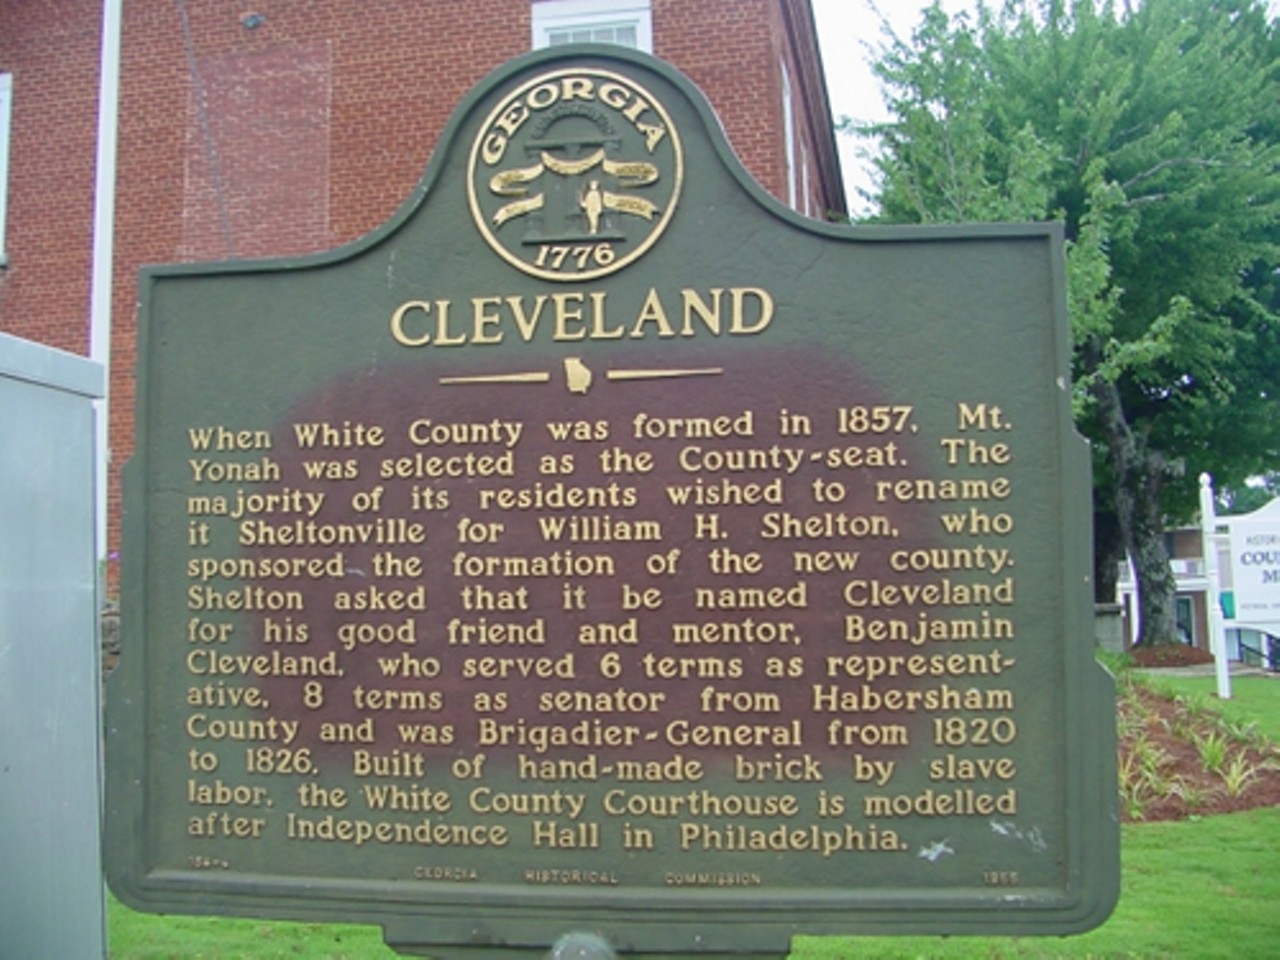 Cleveland, Georgia: Population 3,410. Area code 706. Cleveland is the home of Babyland General Hospital, where visitors can watch the delivery of Cabbage Patch Kids.